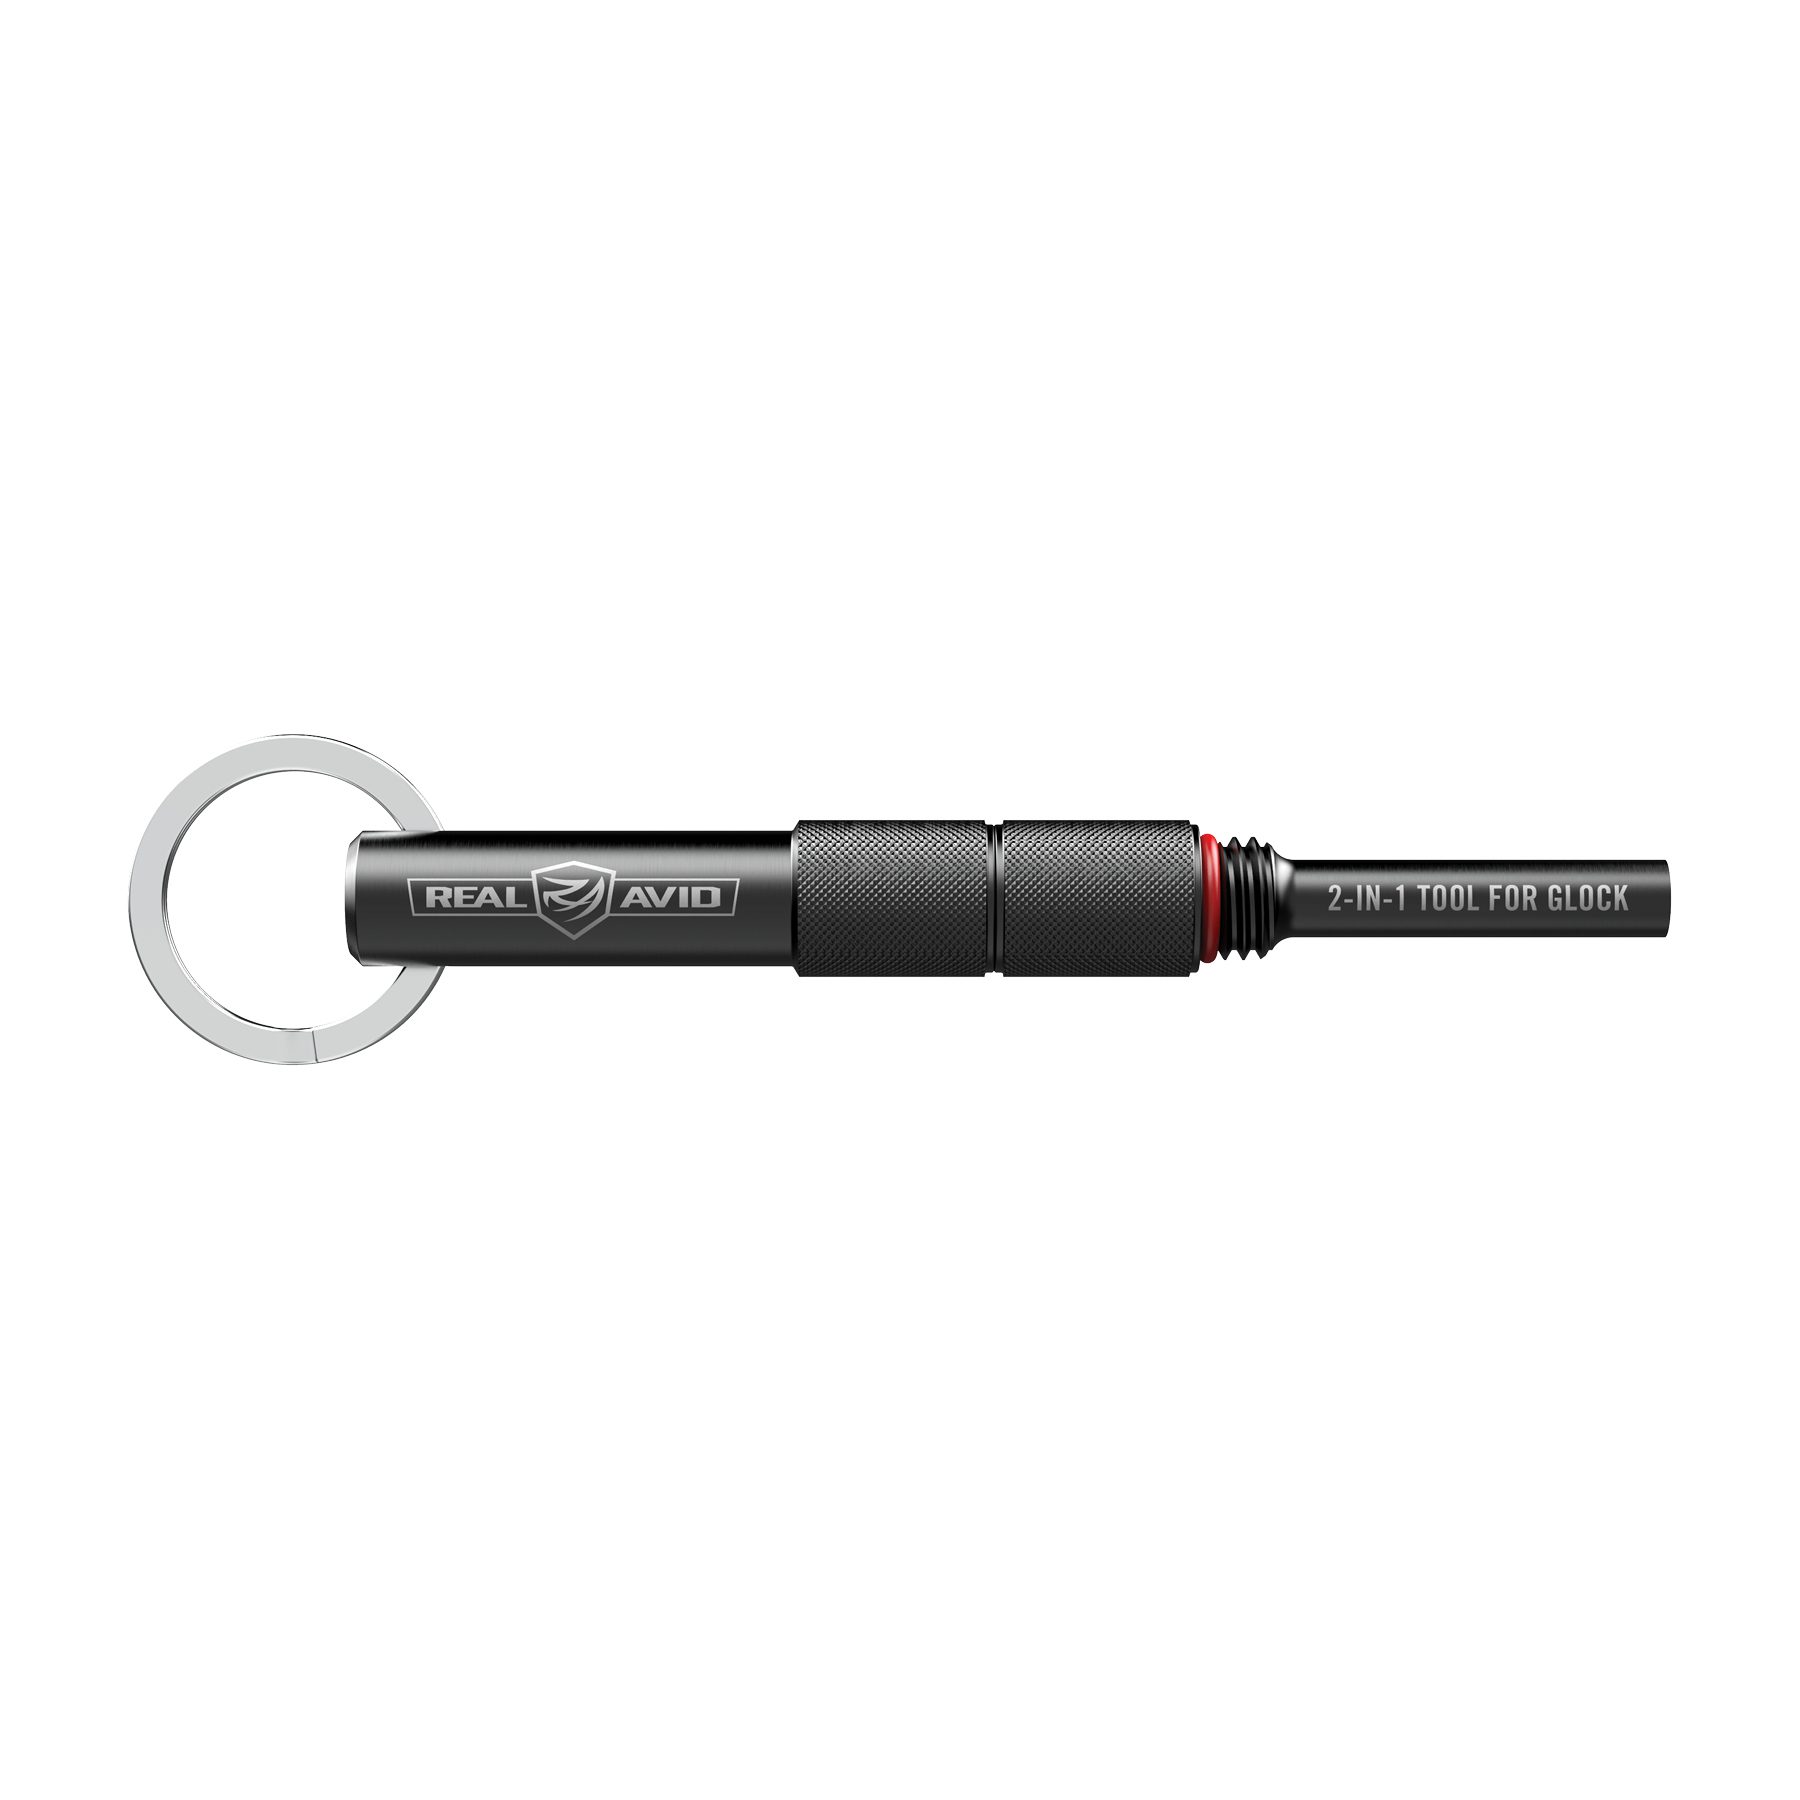 a black and red pen with a key ring